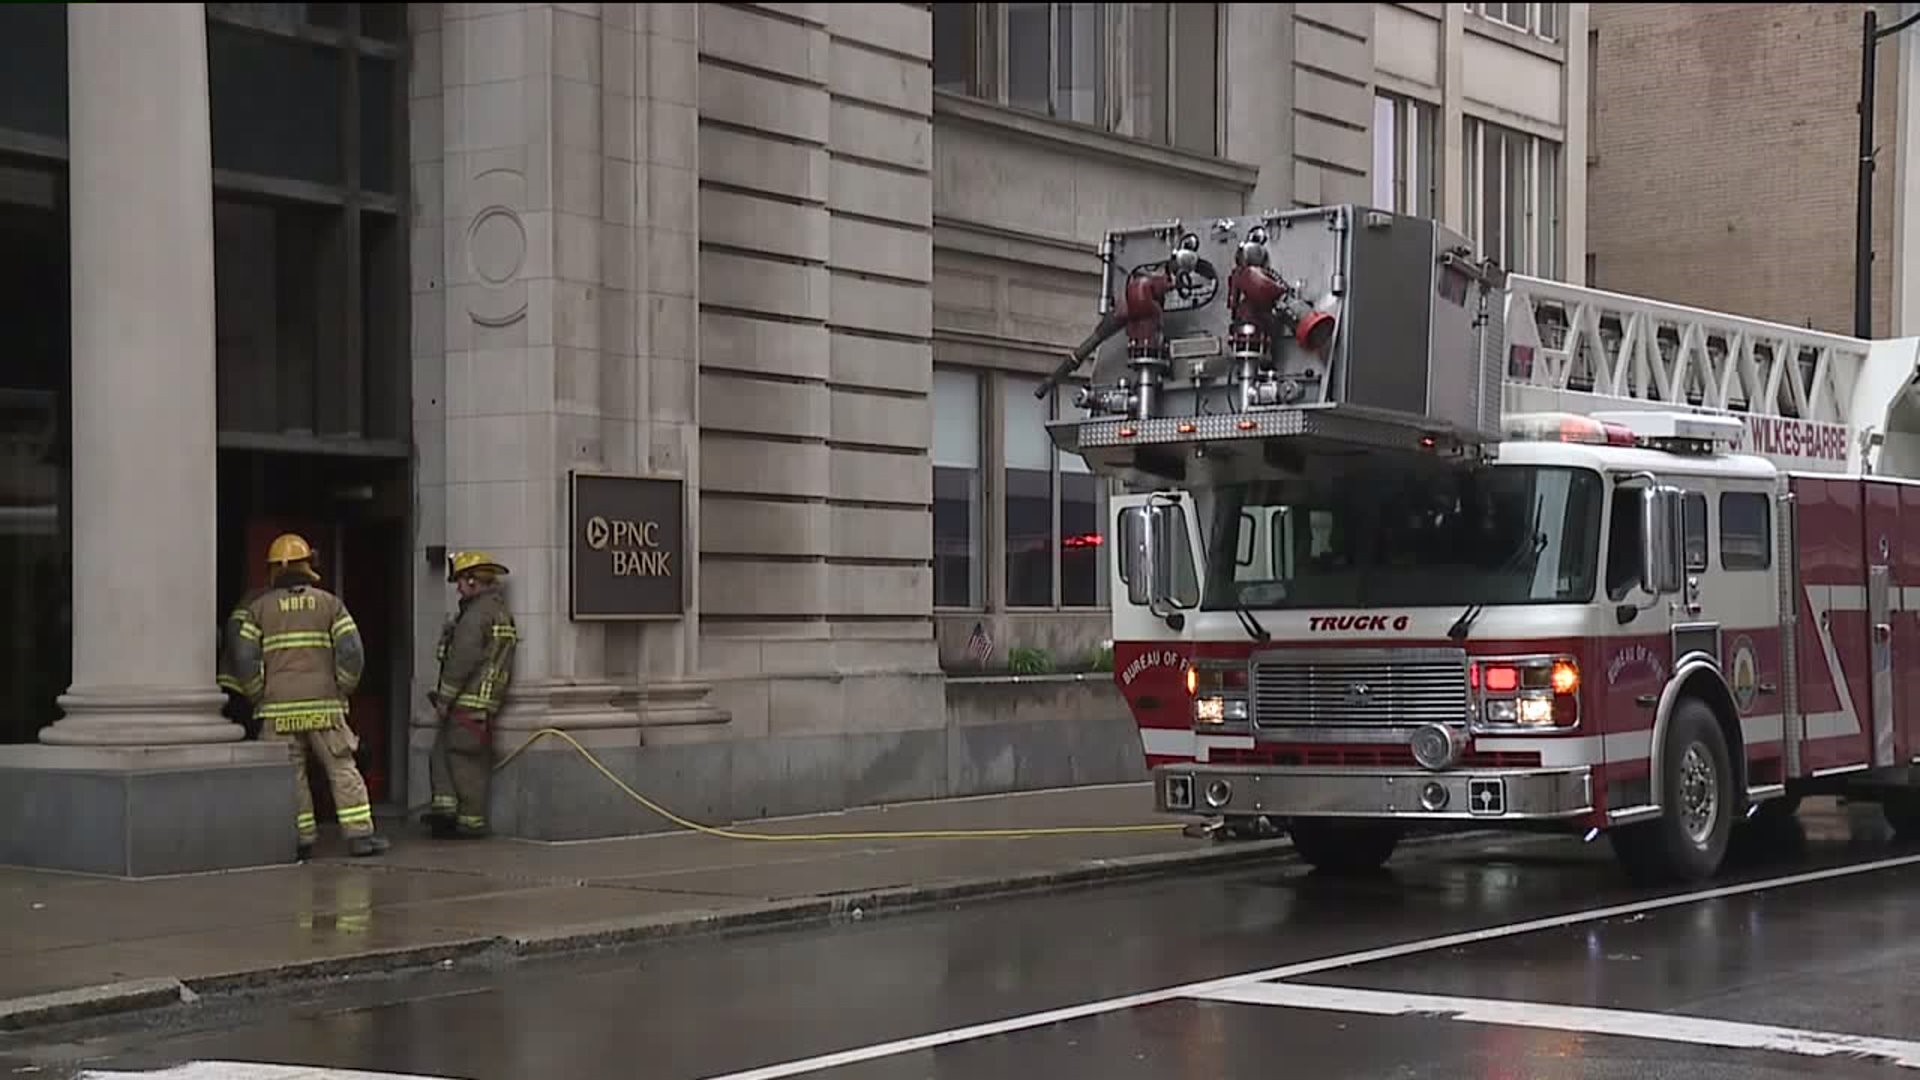 Smoke Fills PNC Bank Building in Wilkes-Barre